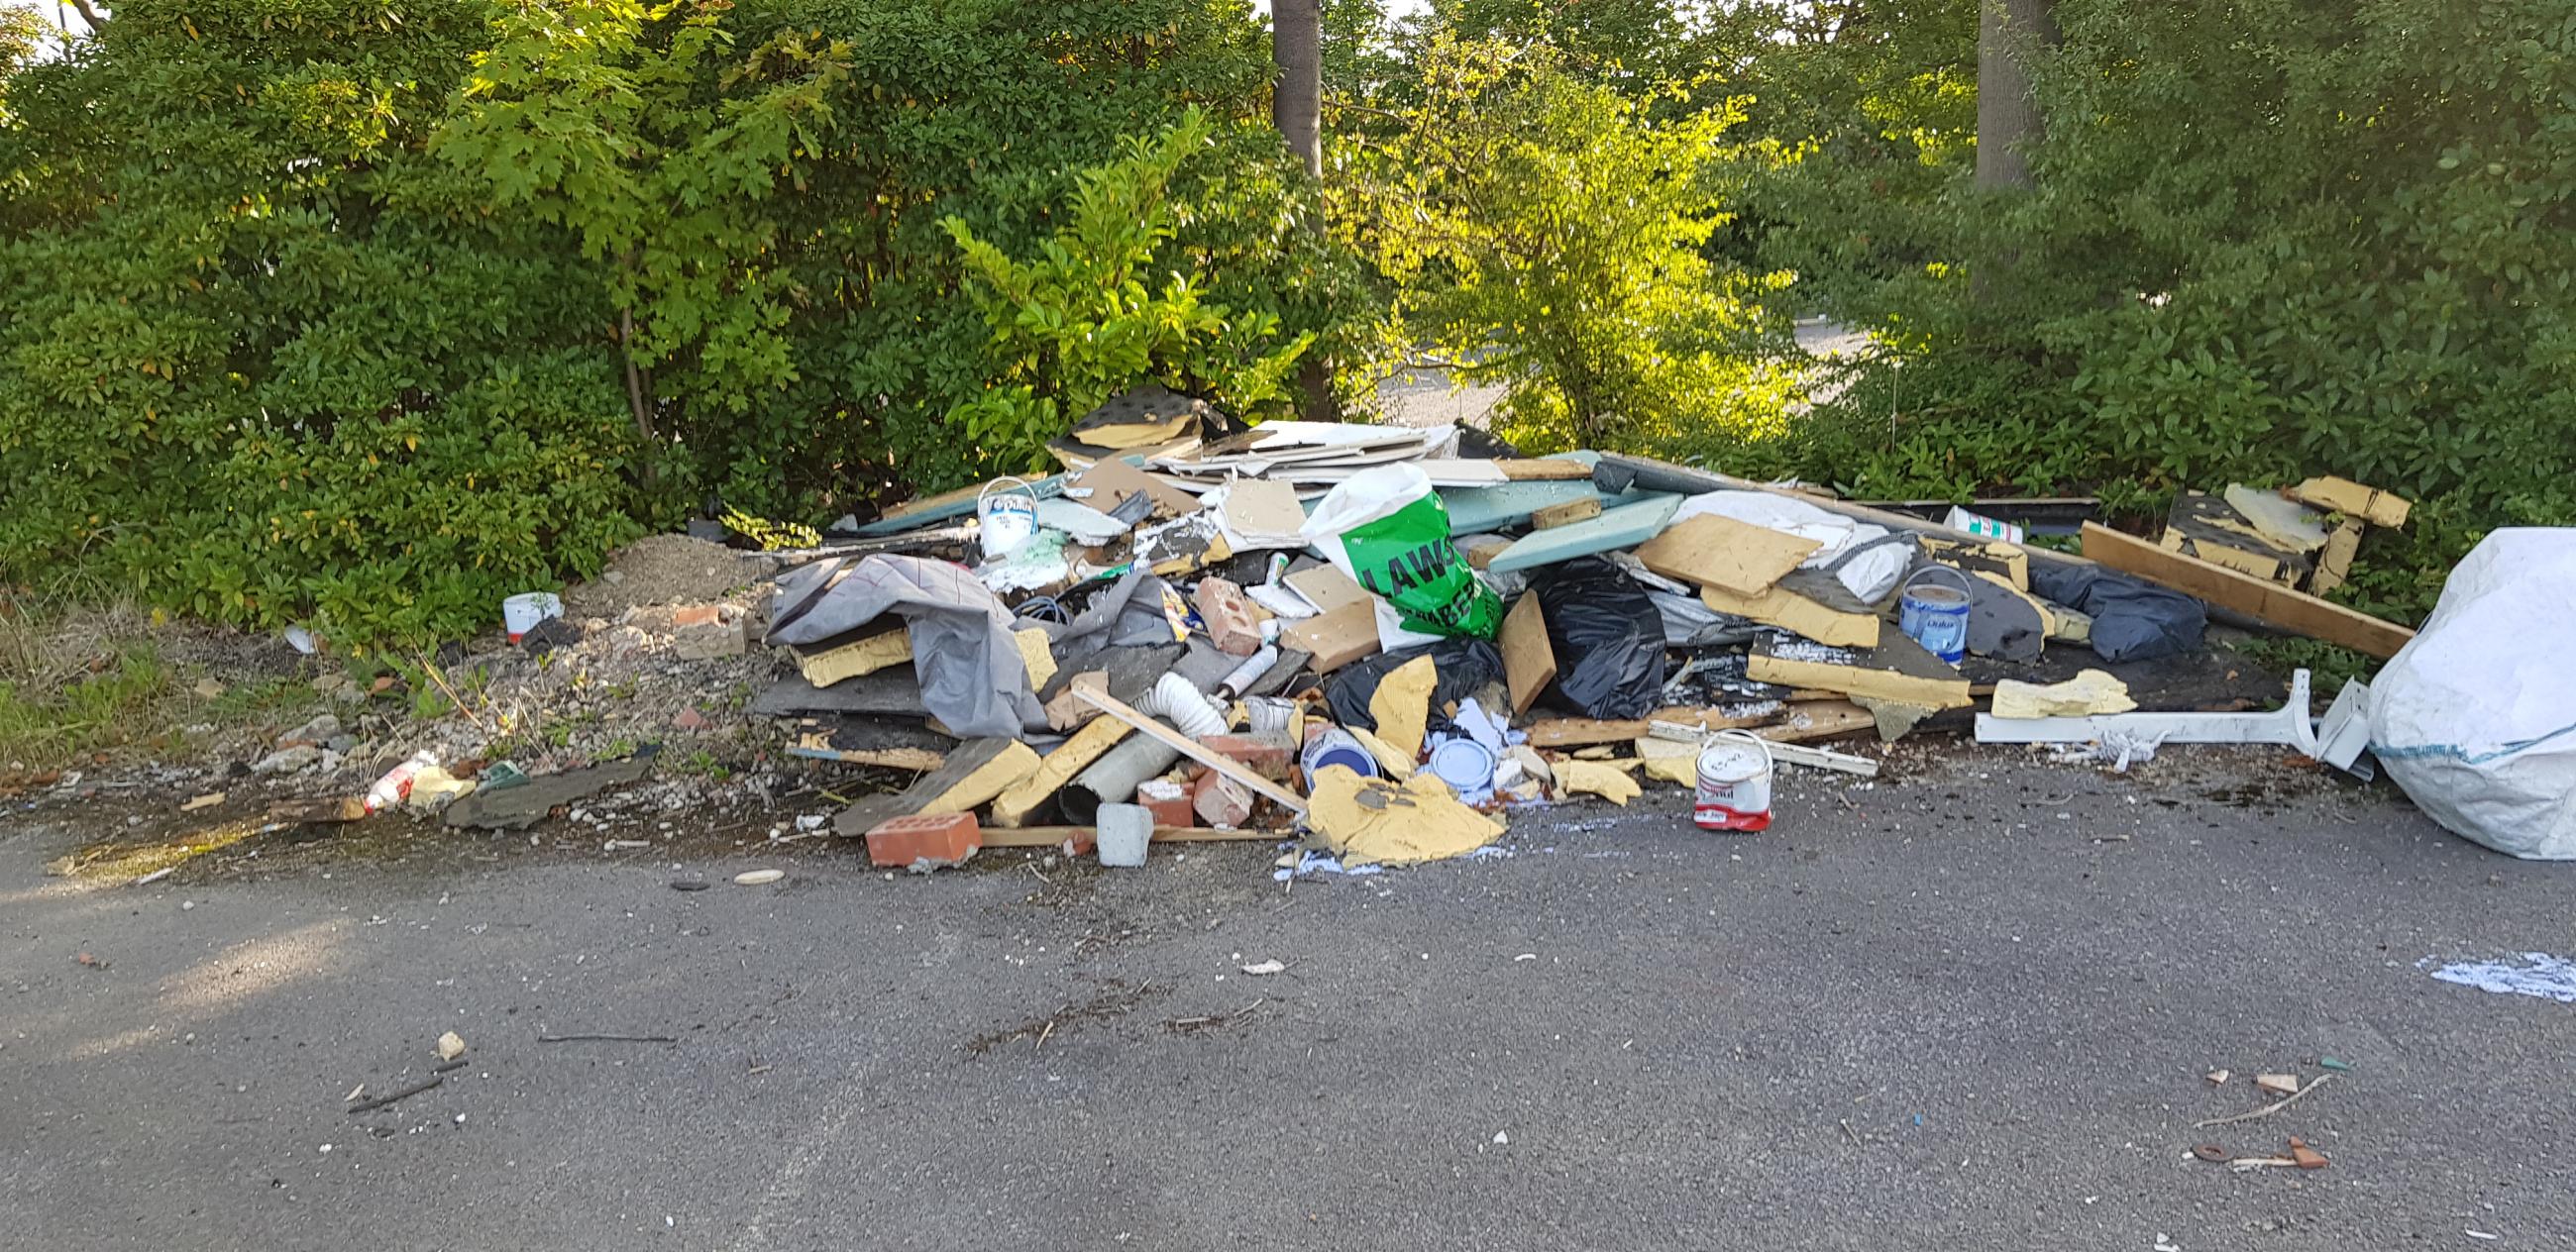 Fly-tipped waste traced back to Mair's business